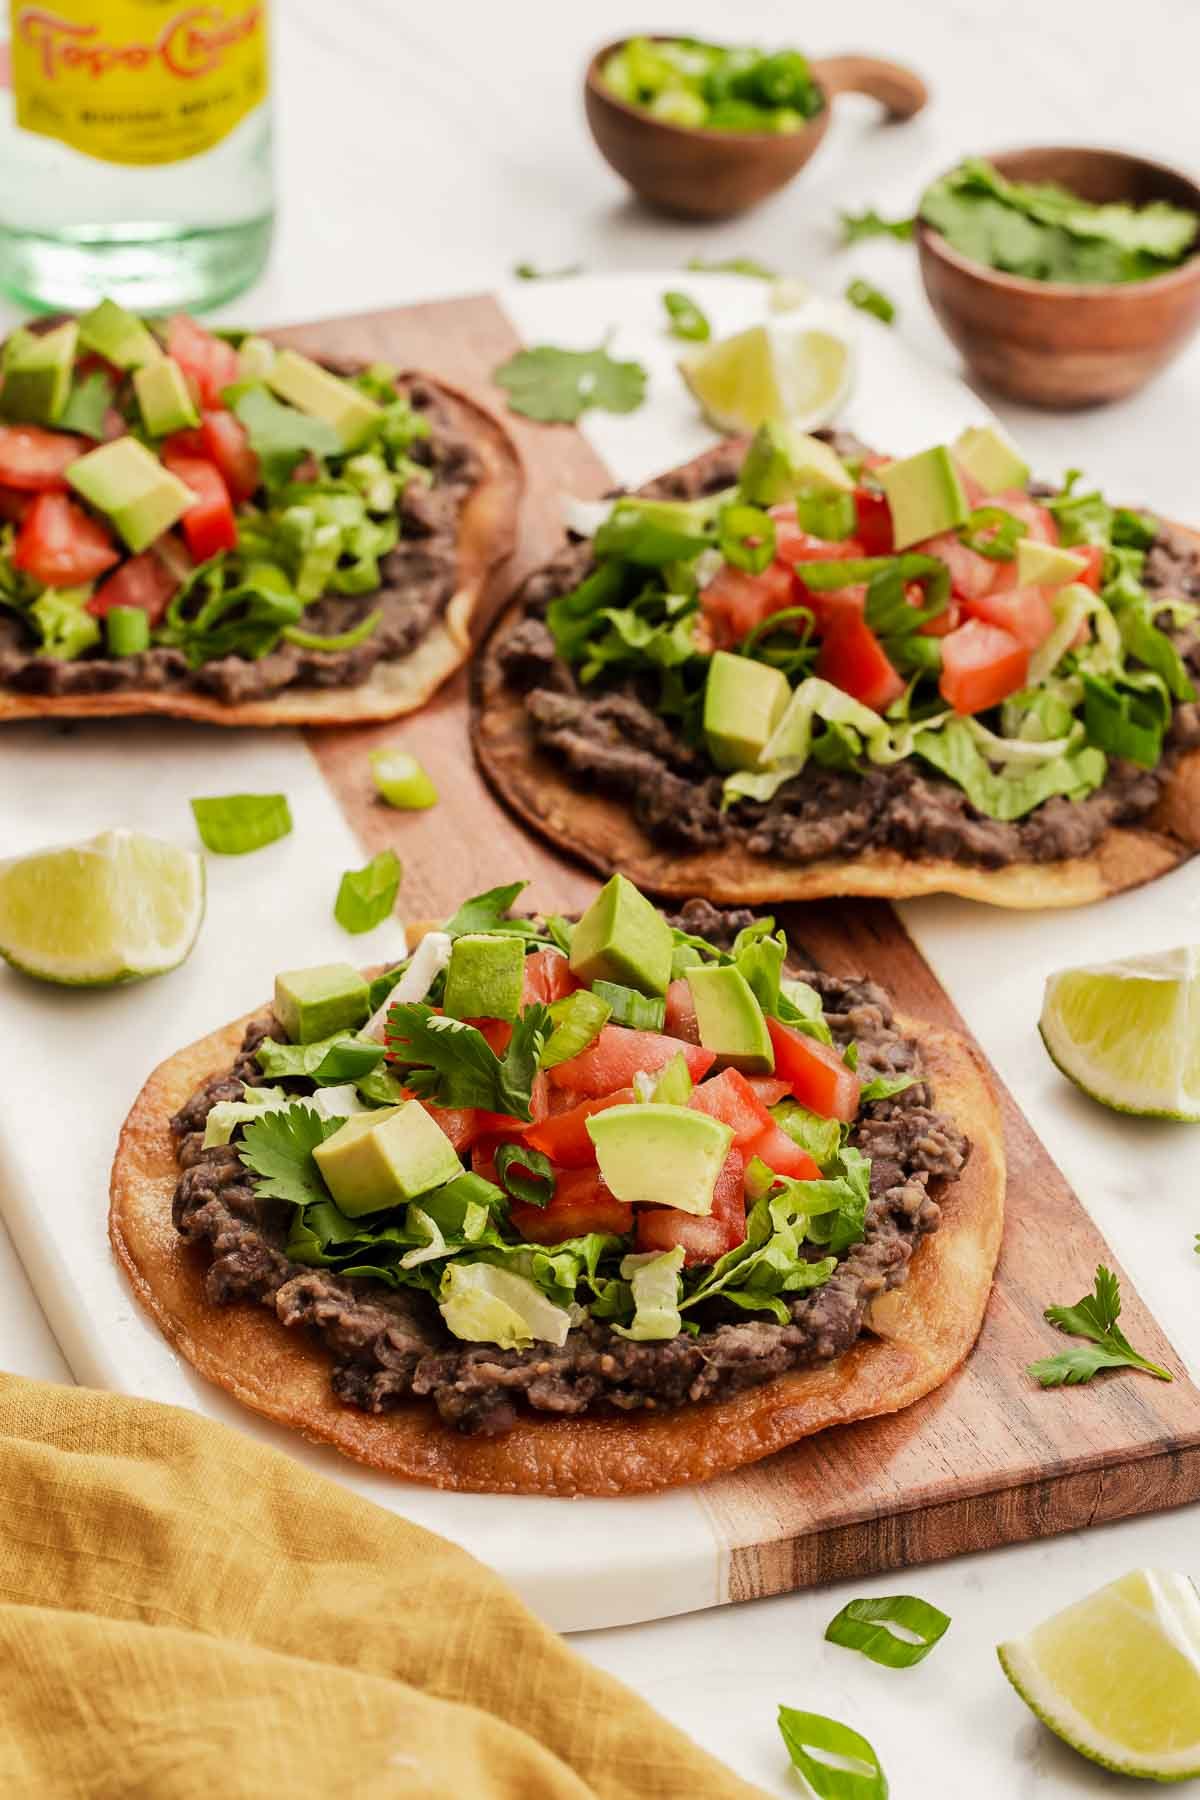 Three black bean tostadas topped with lettuce, avocado and tomatoes on wooden board.